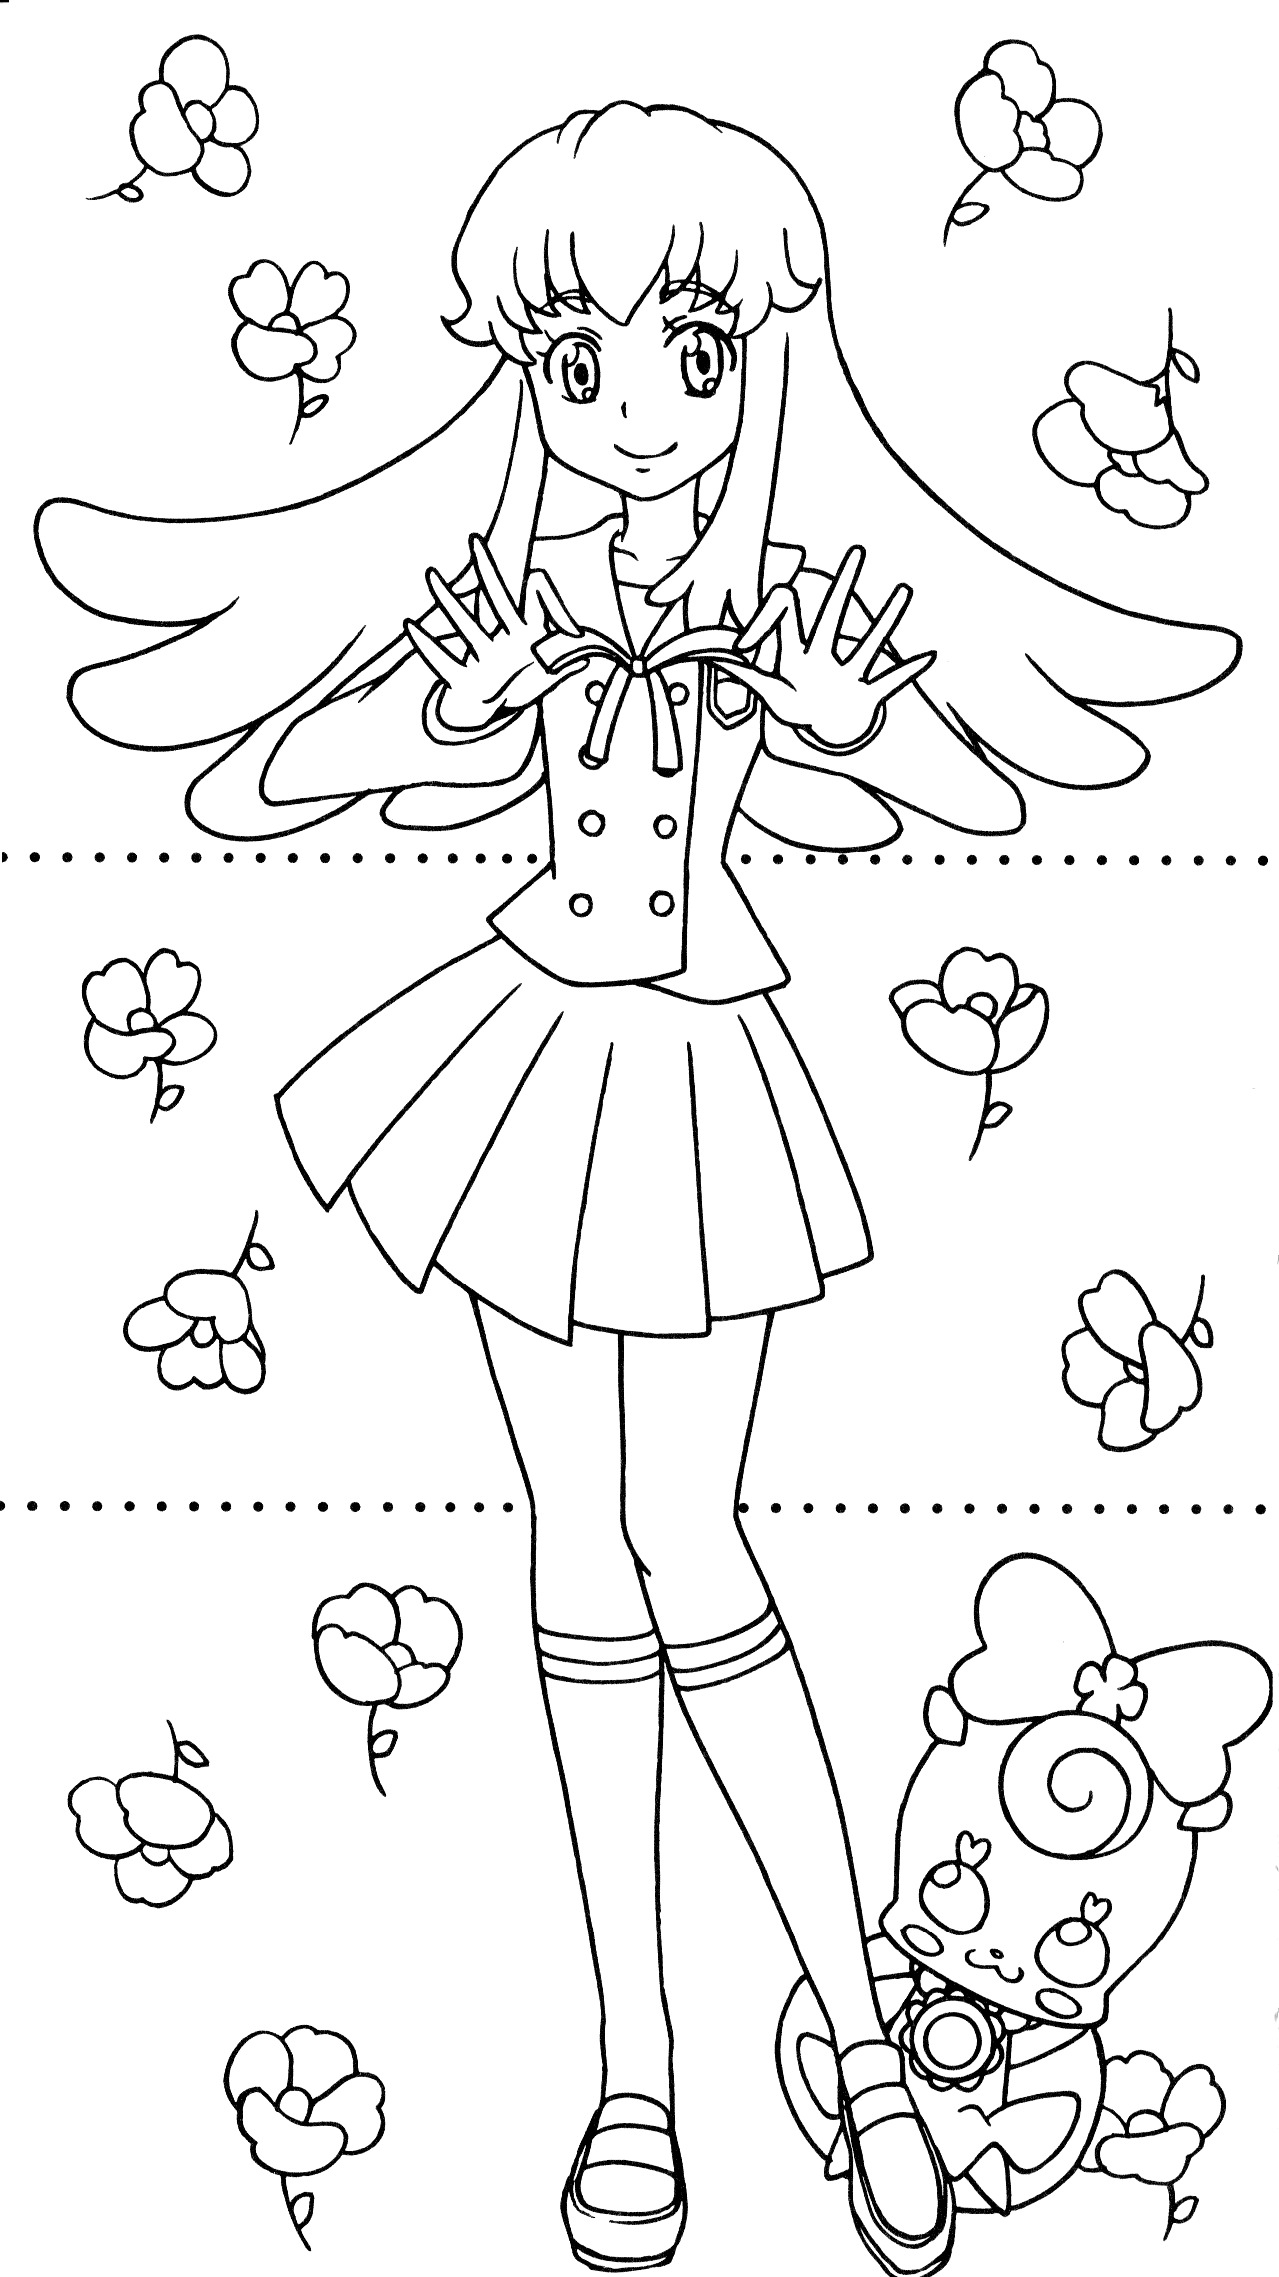 Happiness Charge Precure Dressup Coloring Book 10